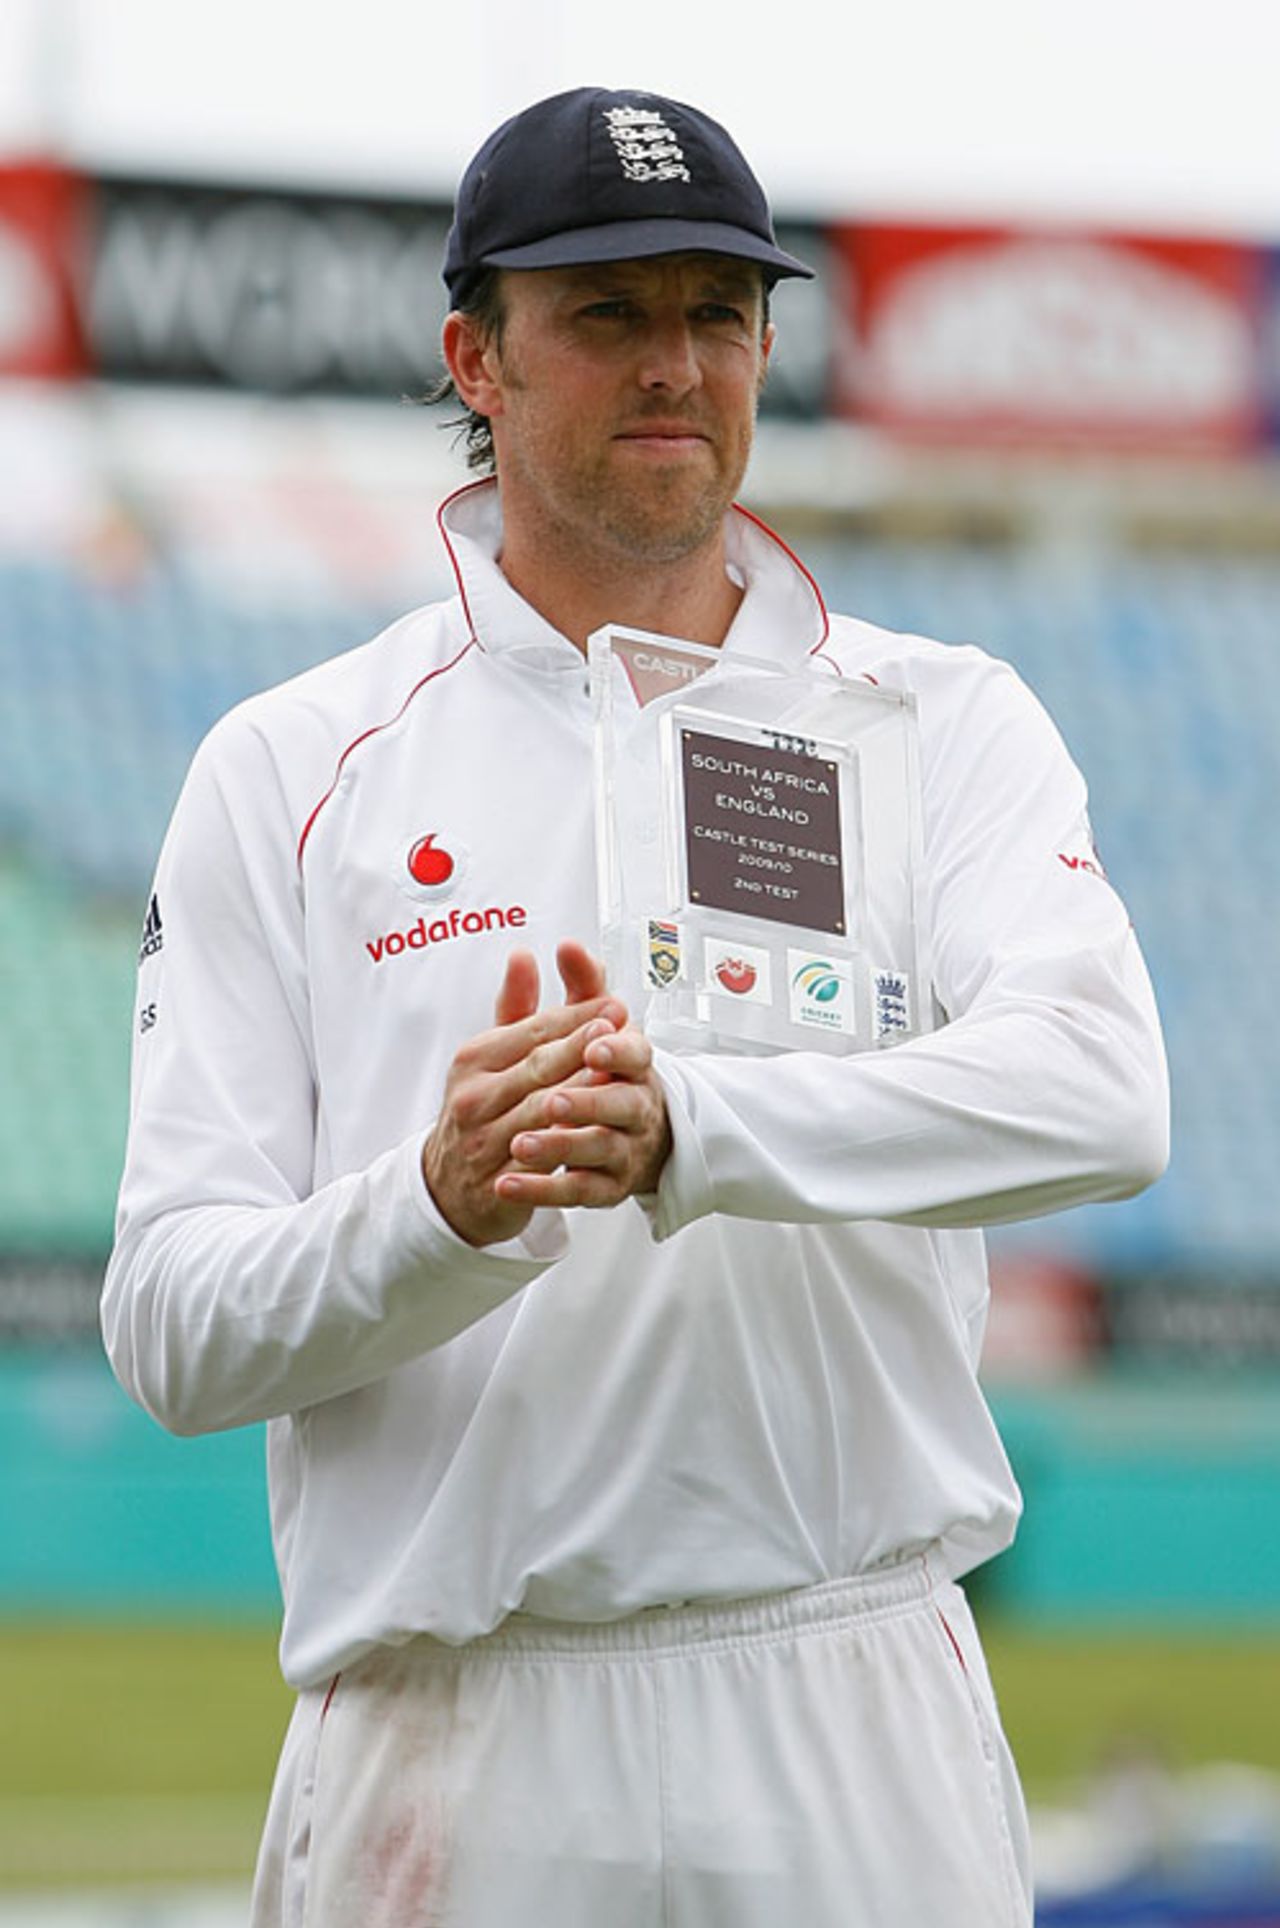 Graeme Swann collected his second successive man-of-the-match award as he helped England to victory, South Africa v England, 2nd Test, Durban, December 30, 2009 